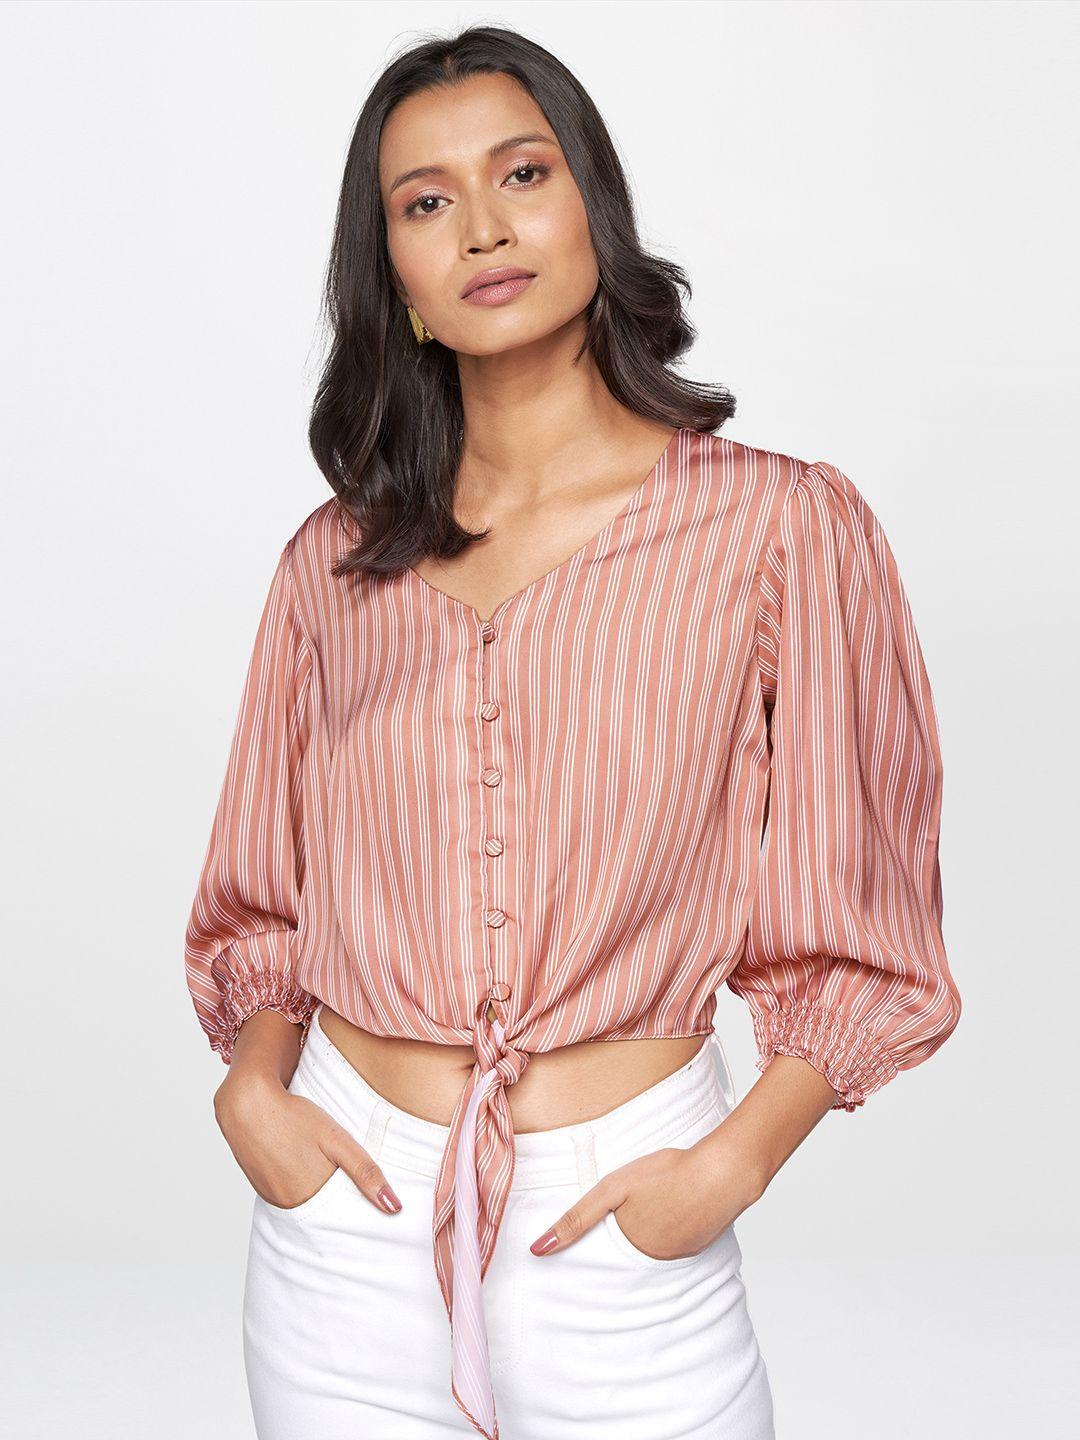 and-women-peach-coloured-striped-shirt-style-crop-top